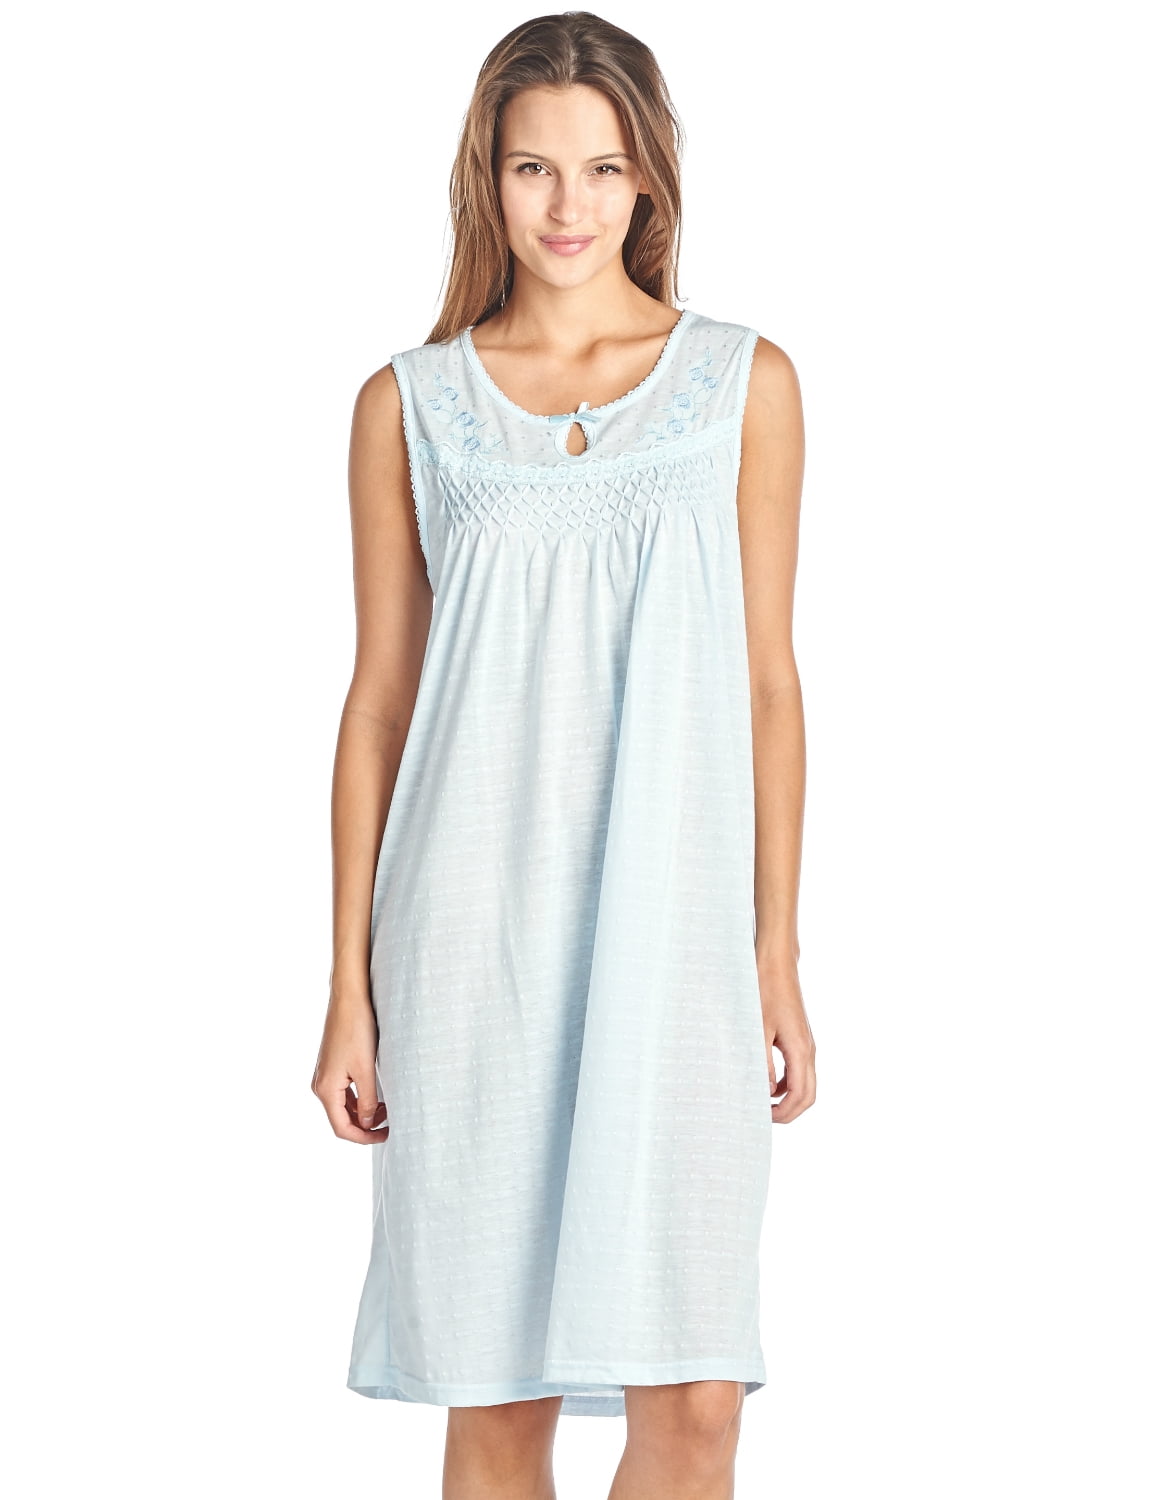 Casual Nights Women's Fancy Lace Floral Sleeveless Nightgown - Walmart.com